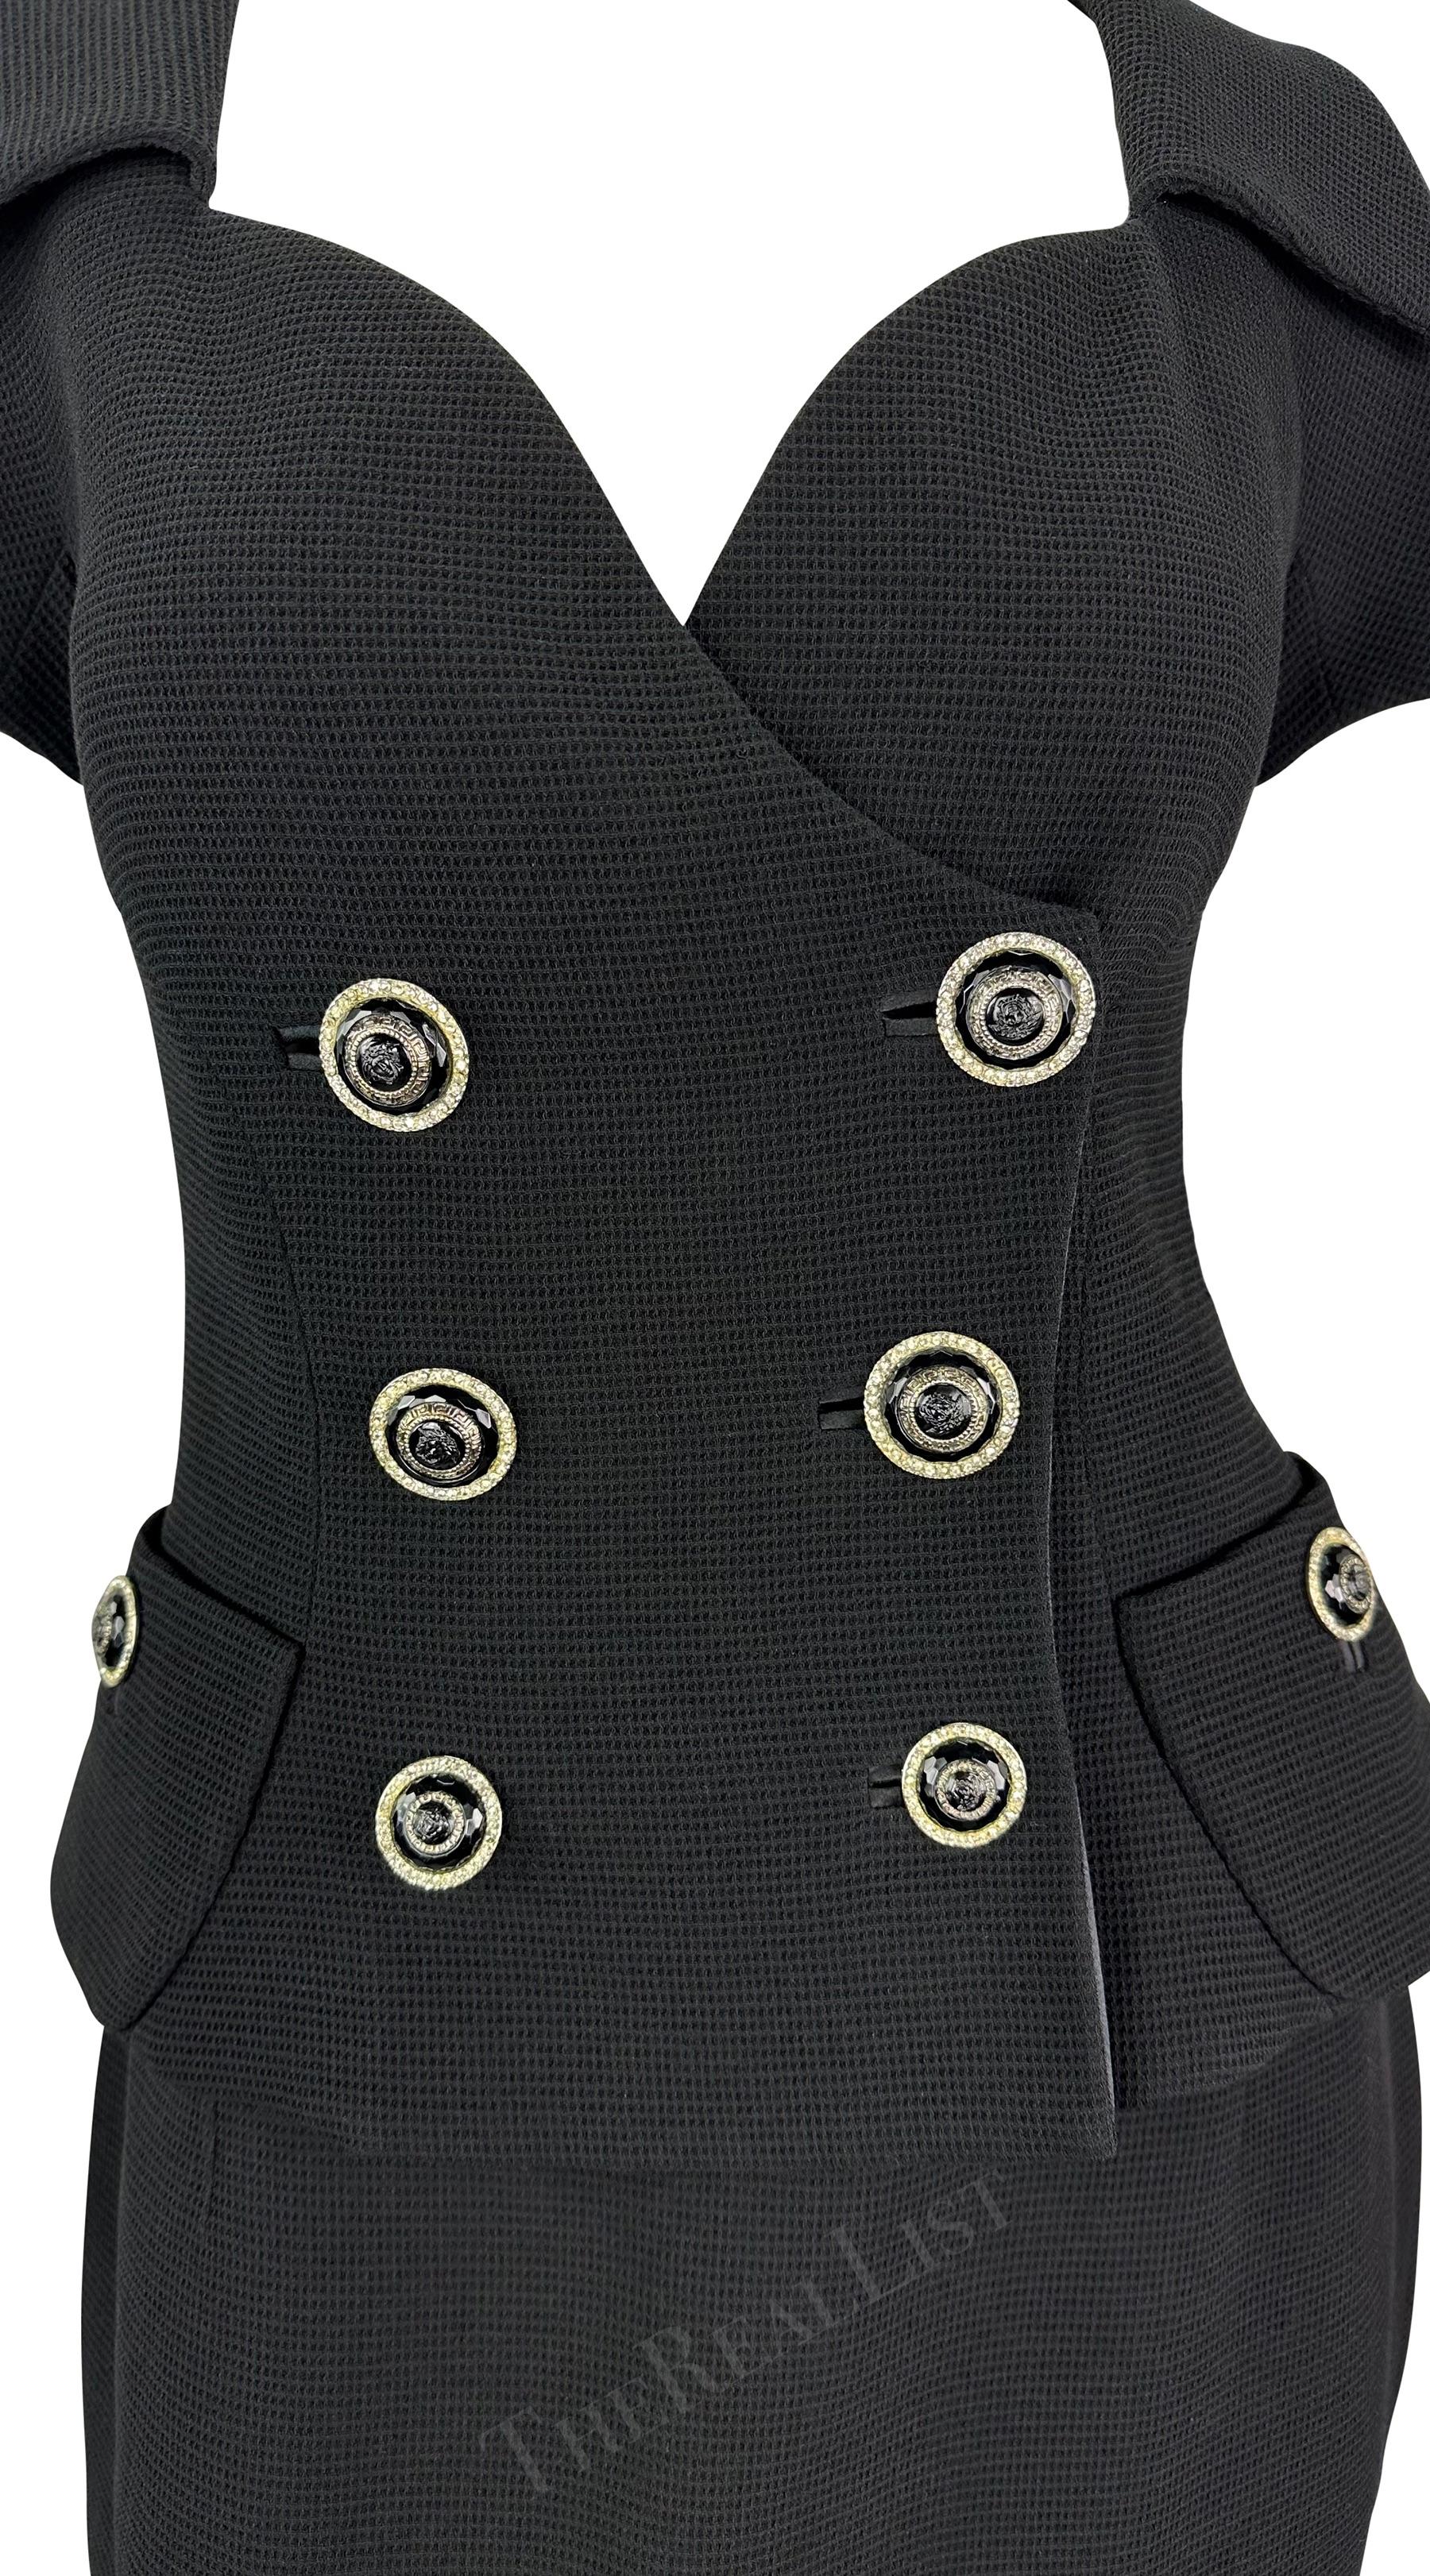 Presenting a fabulous black waffle knit Gianni Versace skirt suit, designed by Gianni Versace. From the Spring/Summer 1993 collection, this skirt suit consists of a short sleeve blazer and matching pencil skirt. The blazer features a double-breasted